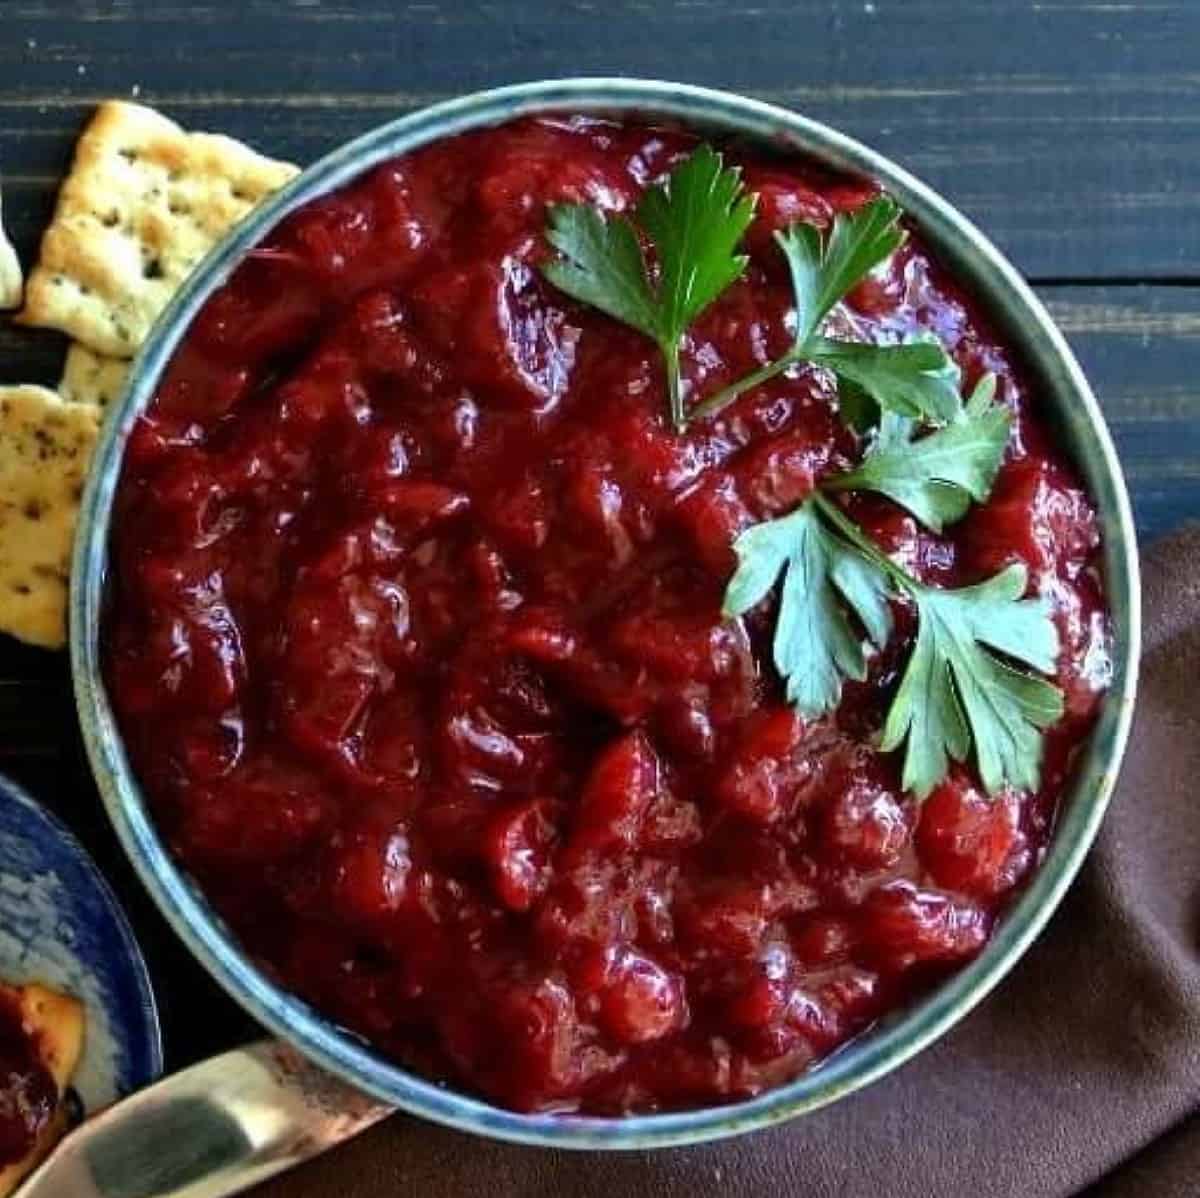 Overhead photos of Cranberry sauce in s blue bowl with crackers.